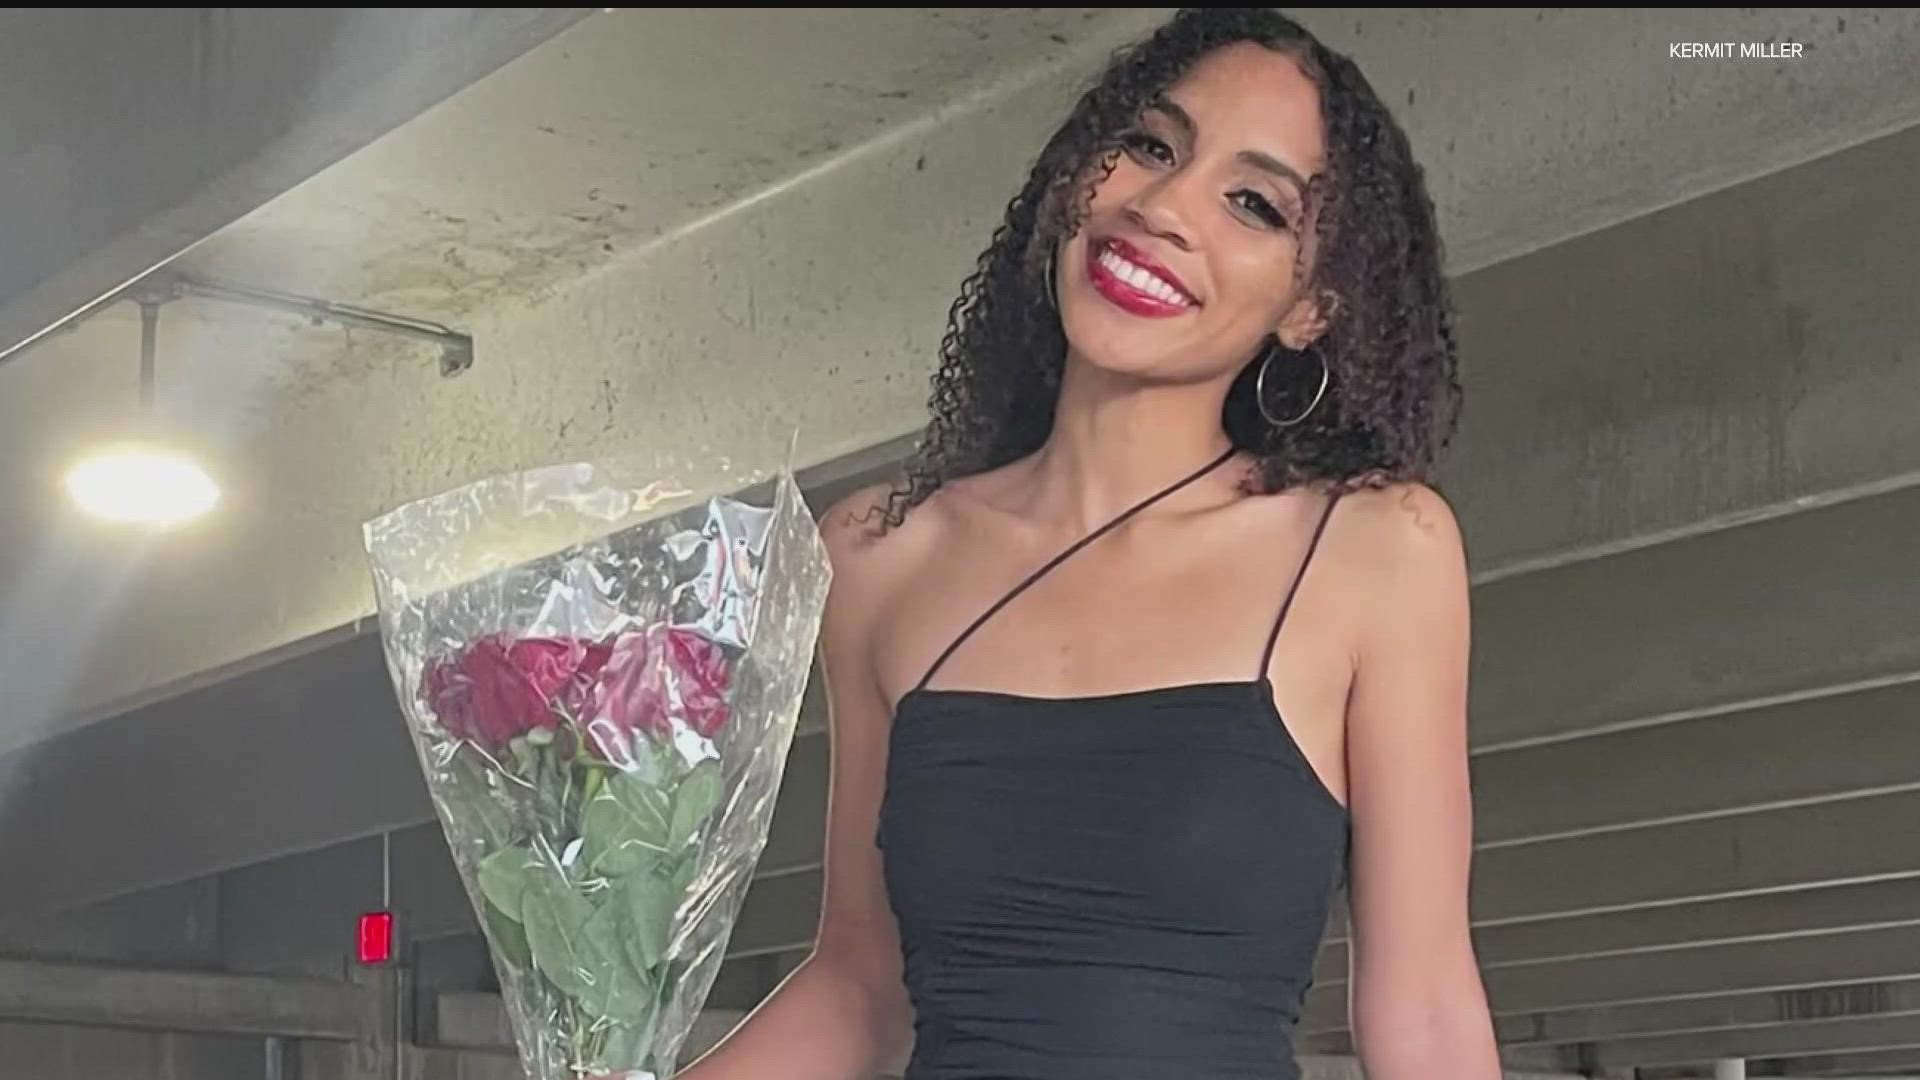 Ebony Miller, 24, was killed when her car was hit by another car near the intersection of 10th Avenue Southeast and University Avenue on Nov. 18.